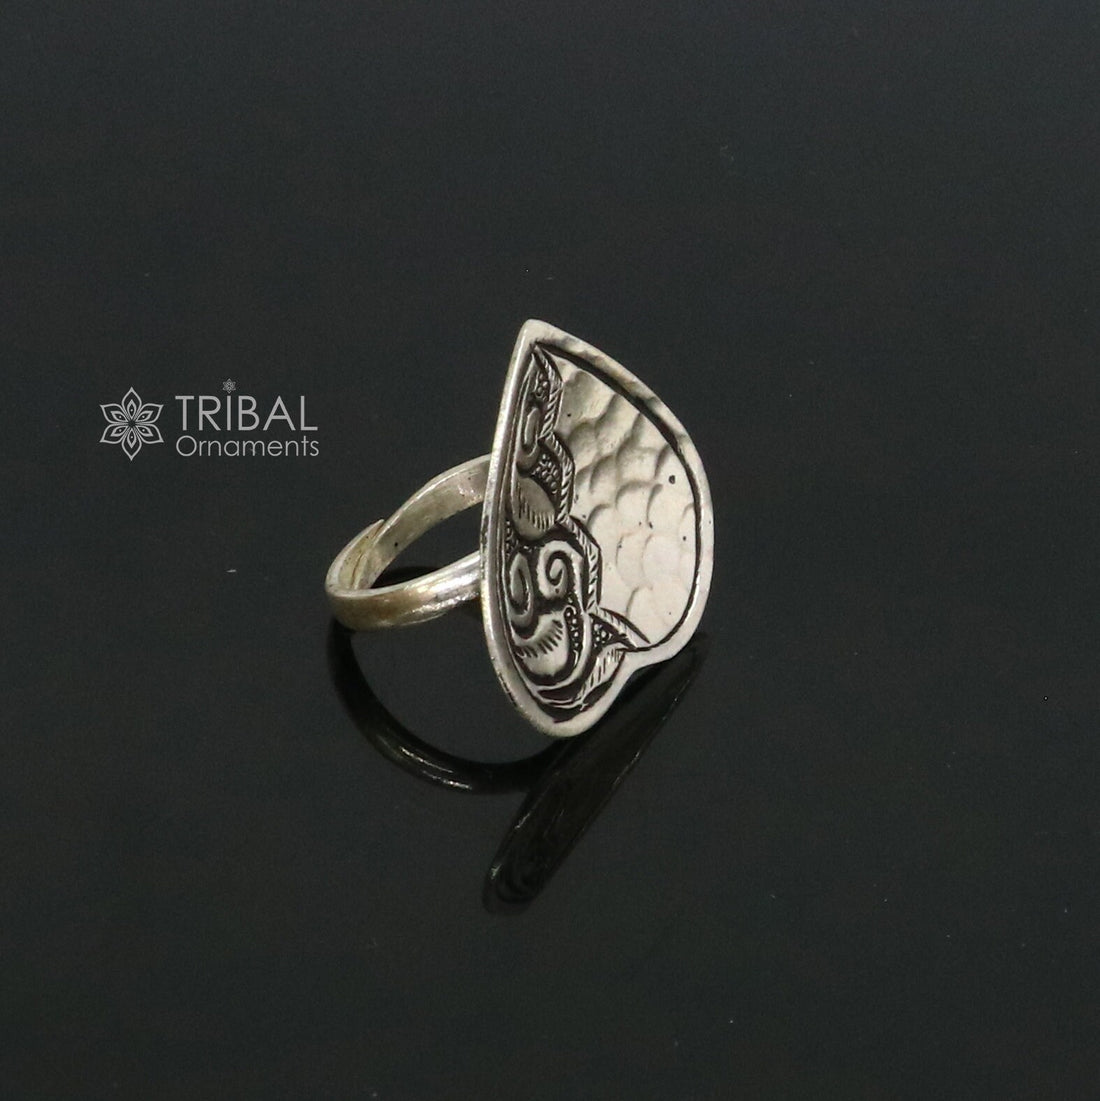 Heart shape Amazing Indian Classical cultural design 925 sterling silver adjustable ring, best tribal ethnic jewelry Navratri jewelry sr394 - TRIBAL ORNAMENTS